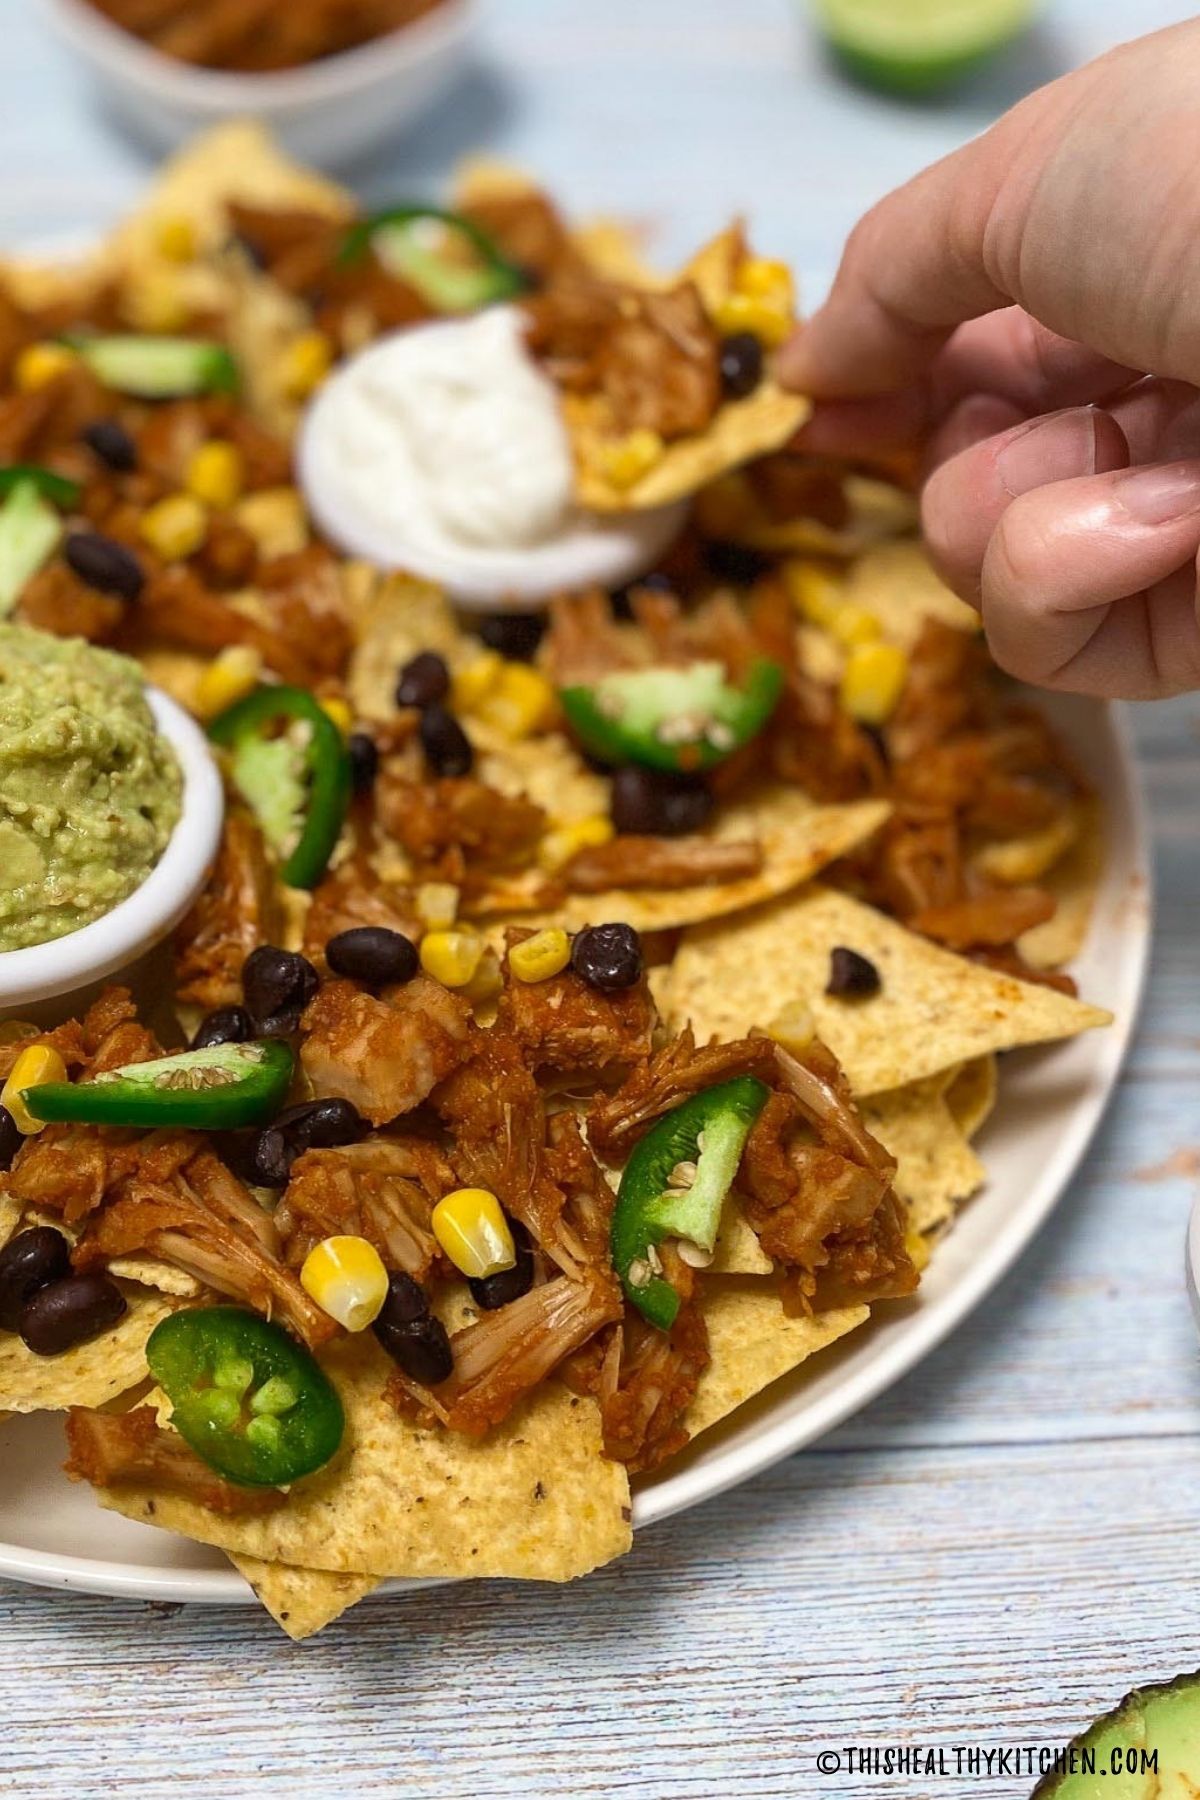 Chip being dunked into bowl of sour cream in the center of a platter of nachos.